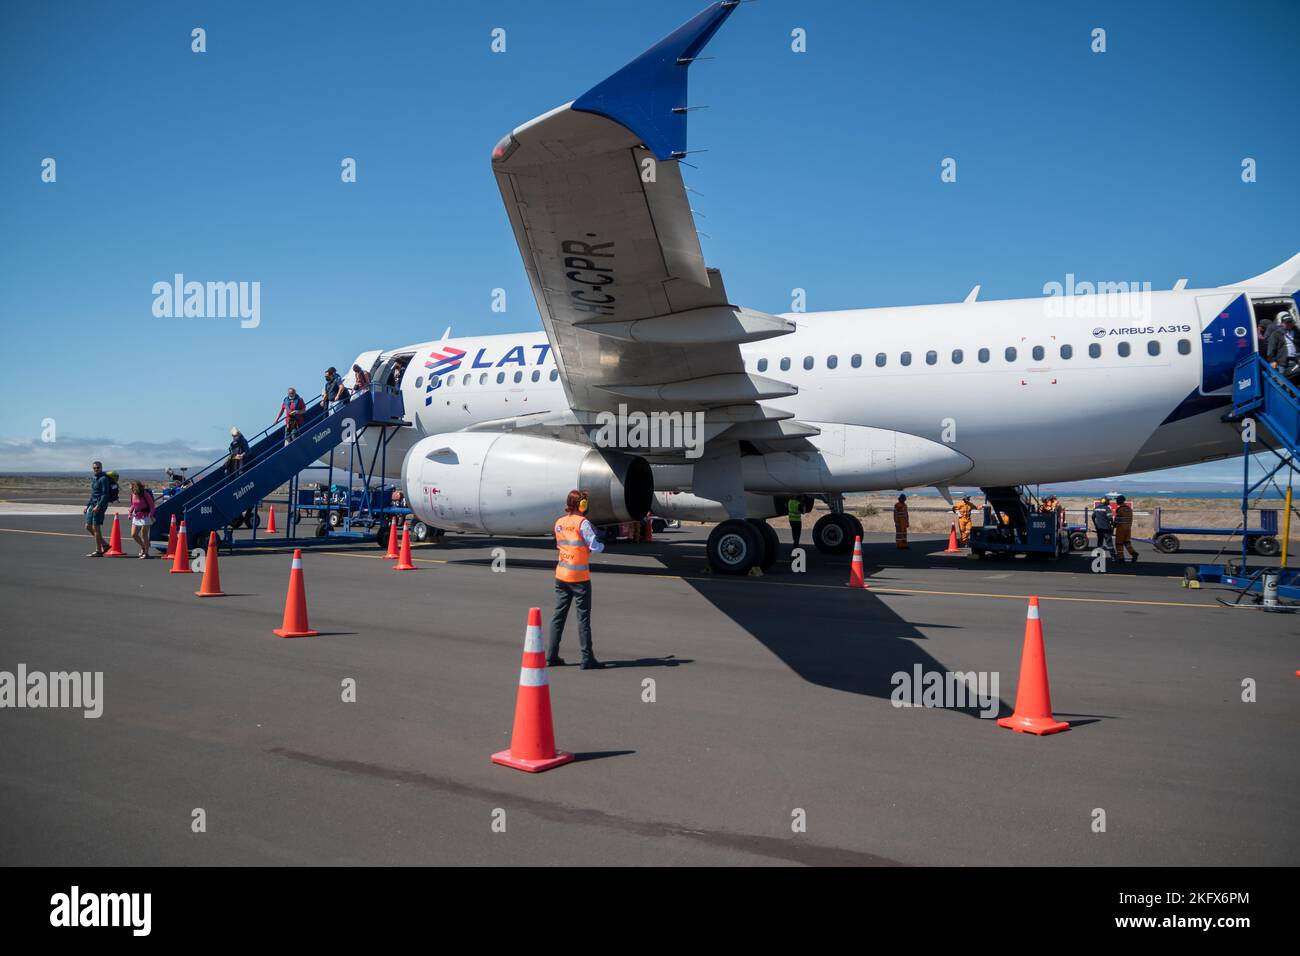 Passengers disembarking from a Latam plane, Seymour Airport, Galapagos Islands Stock Photo